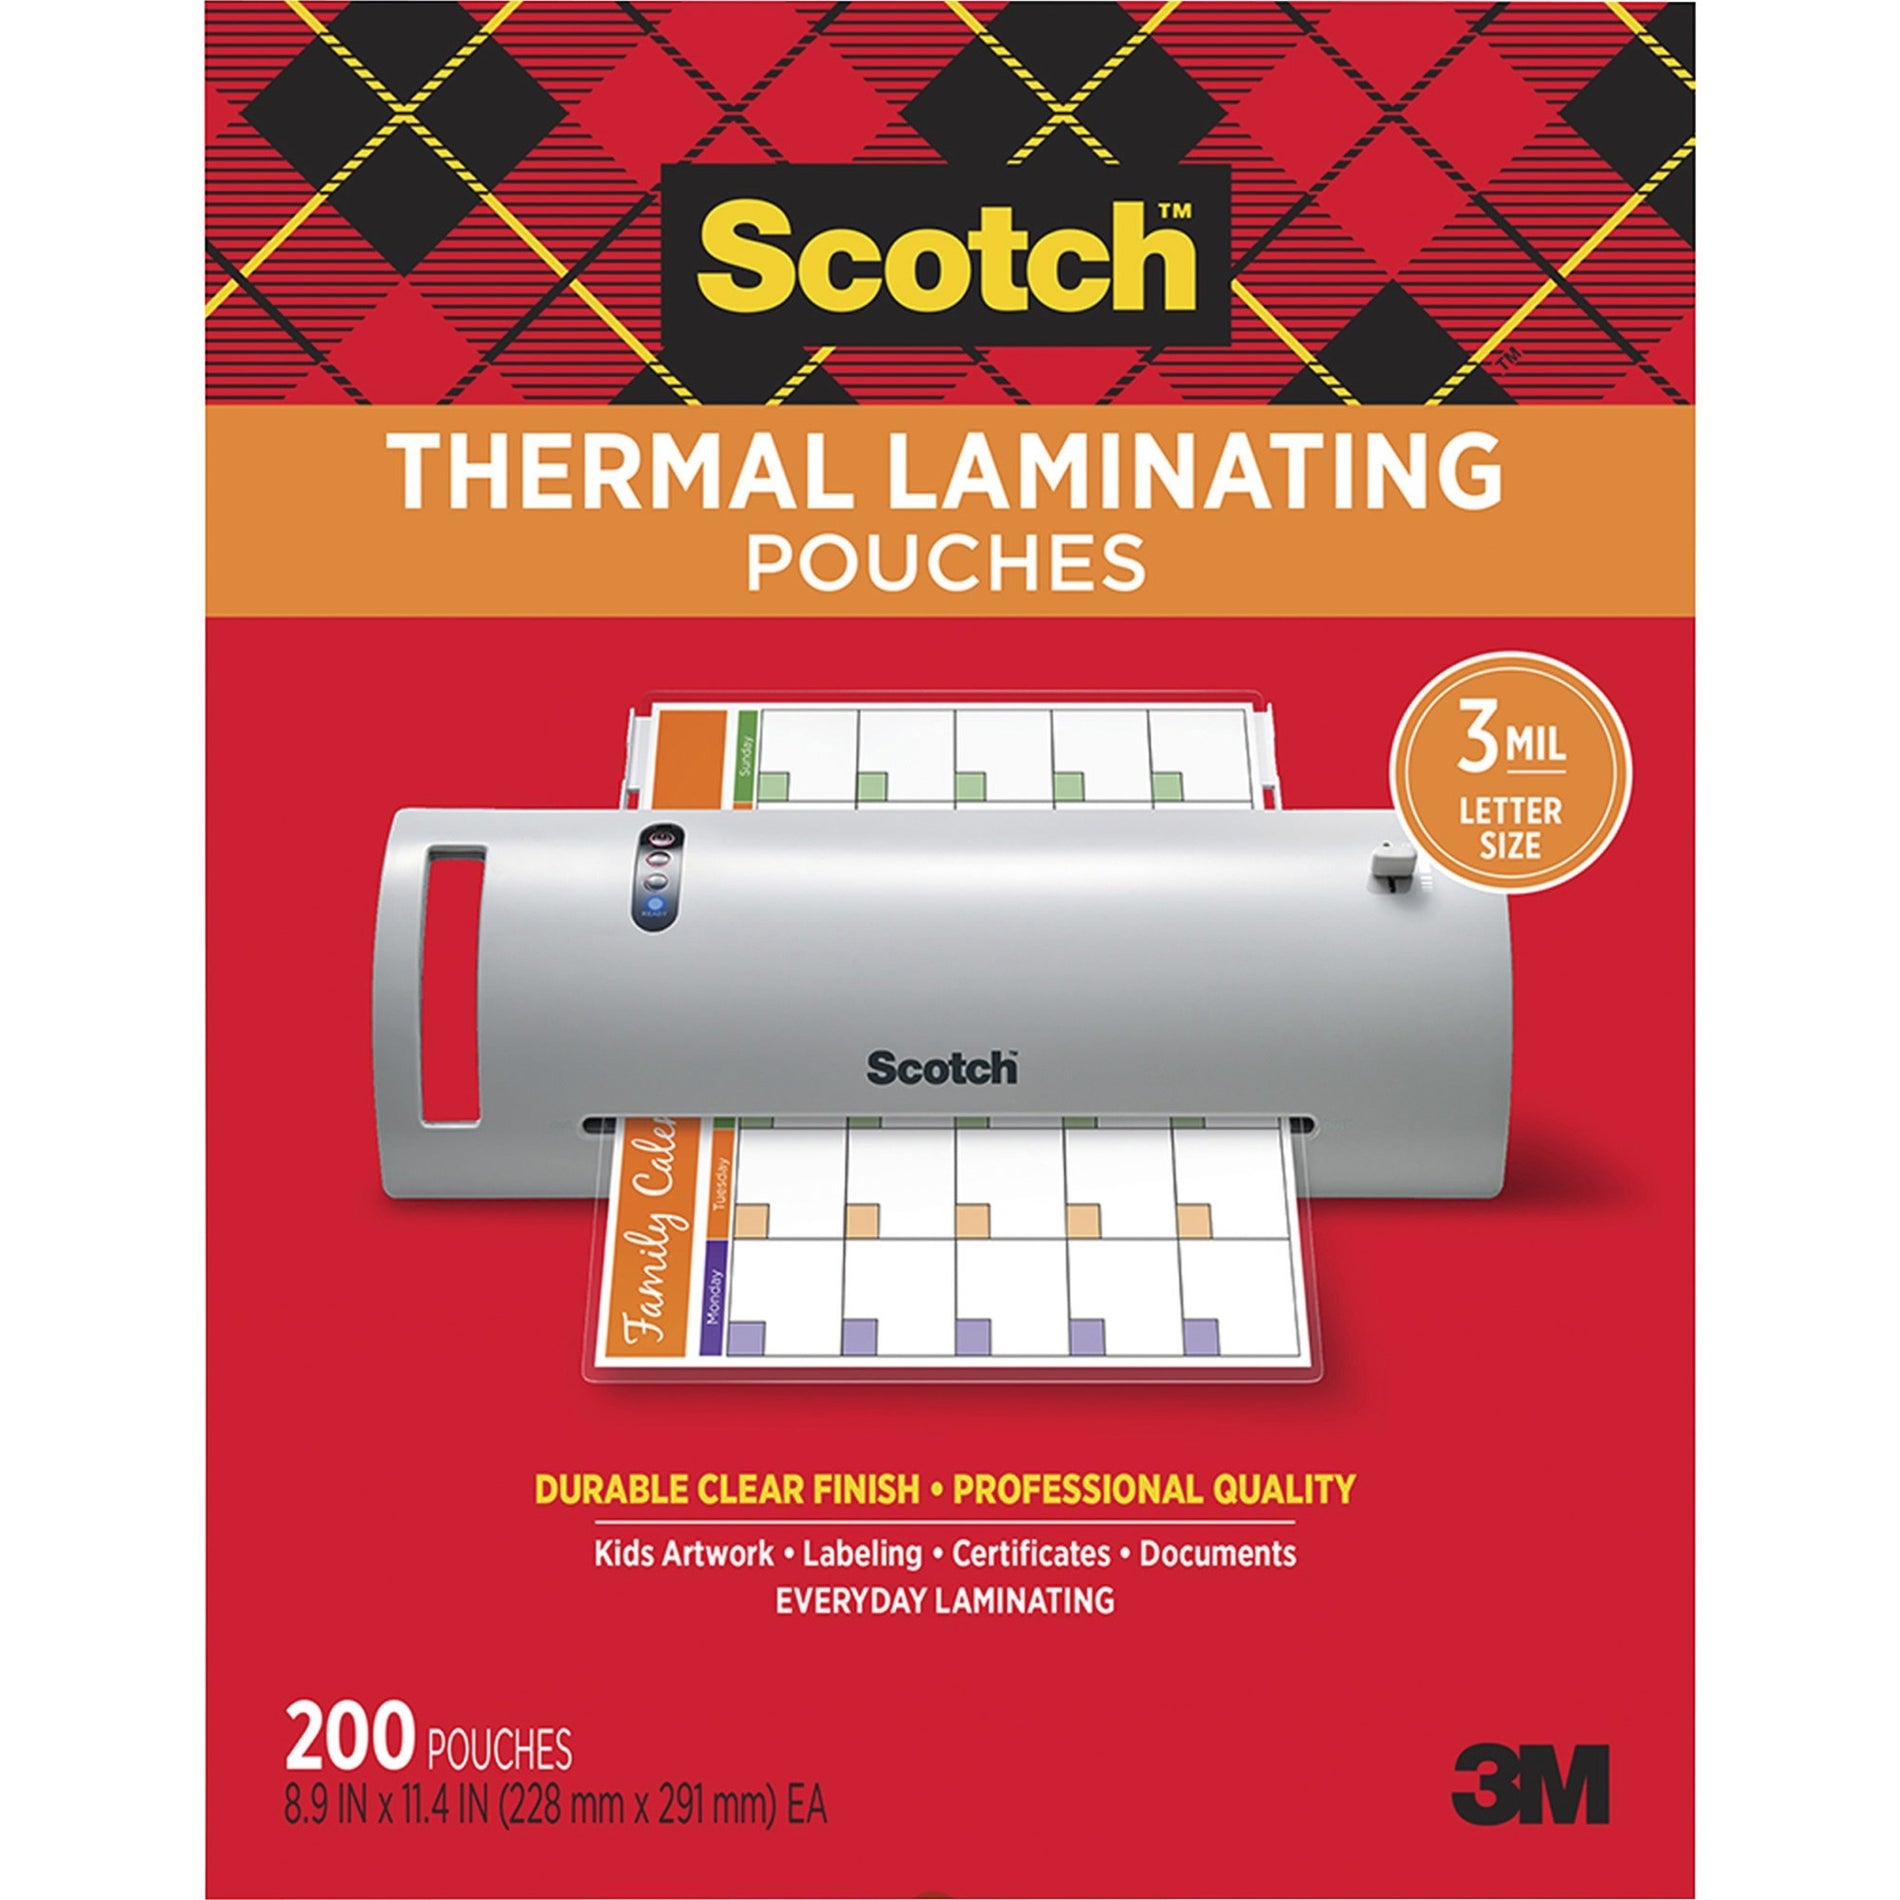 Scotch TP3854200 Thermal Laminating Pouches, Clear, 200/PK